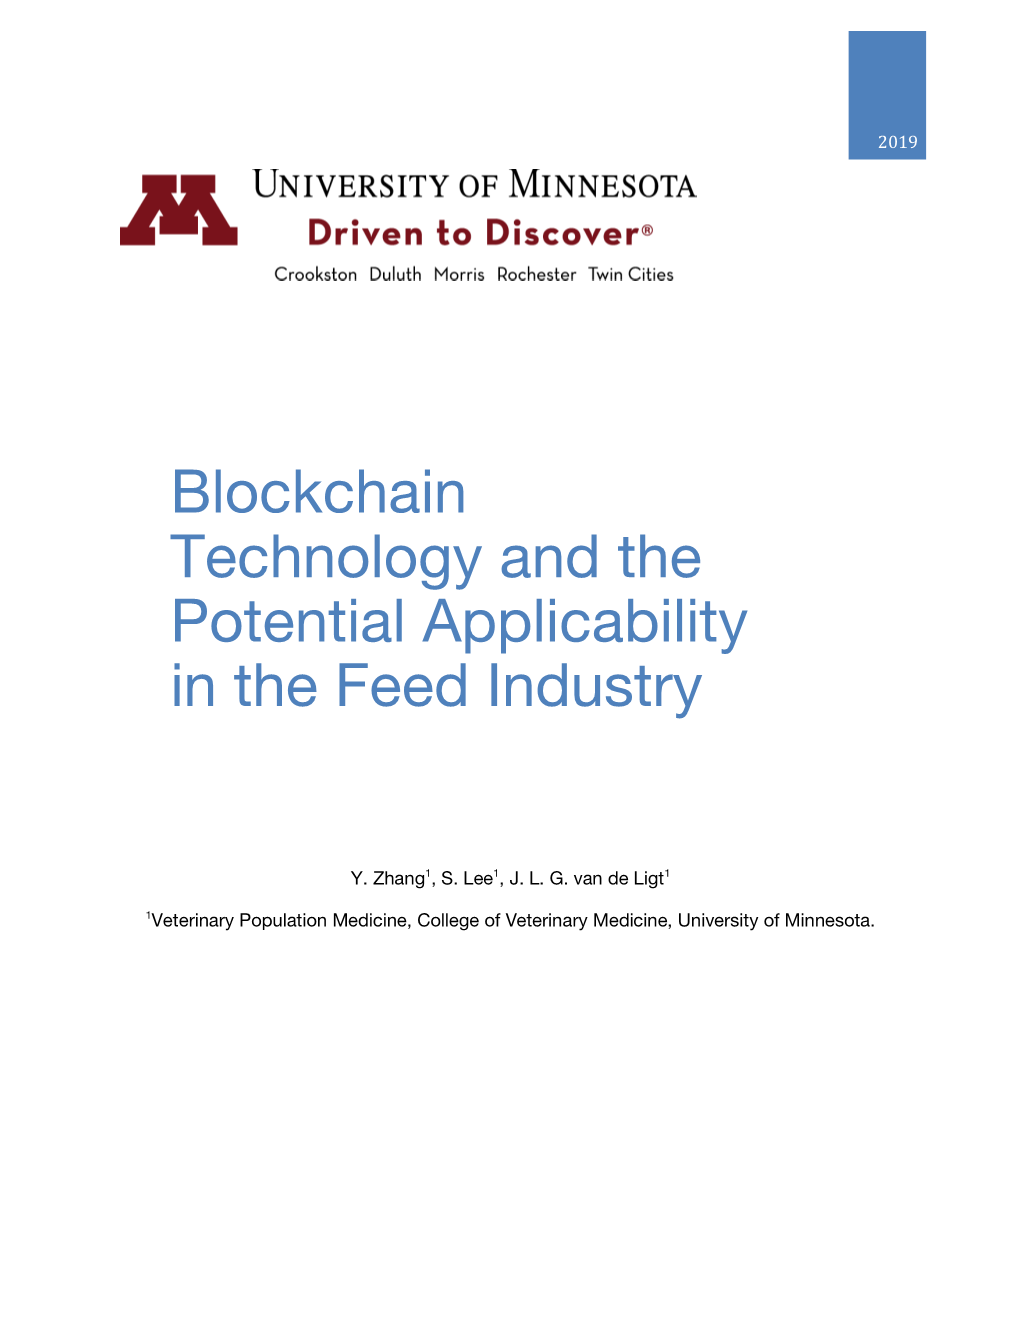 Blockchain Technology and the Potential Applicability in the Feed Industry Page 1 of 51